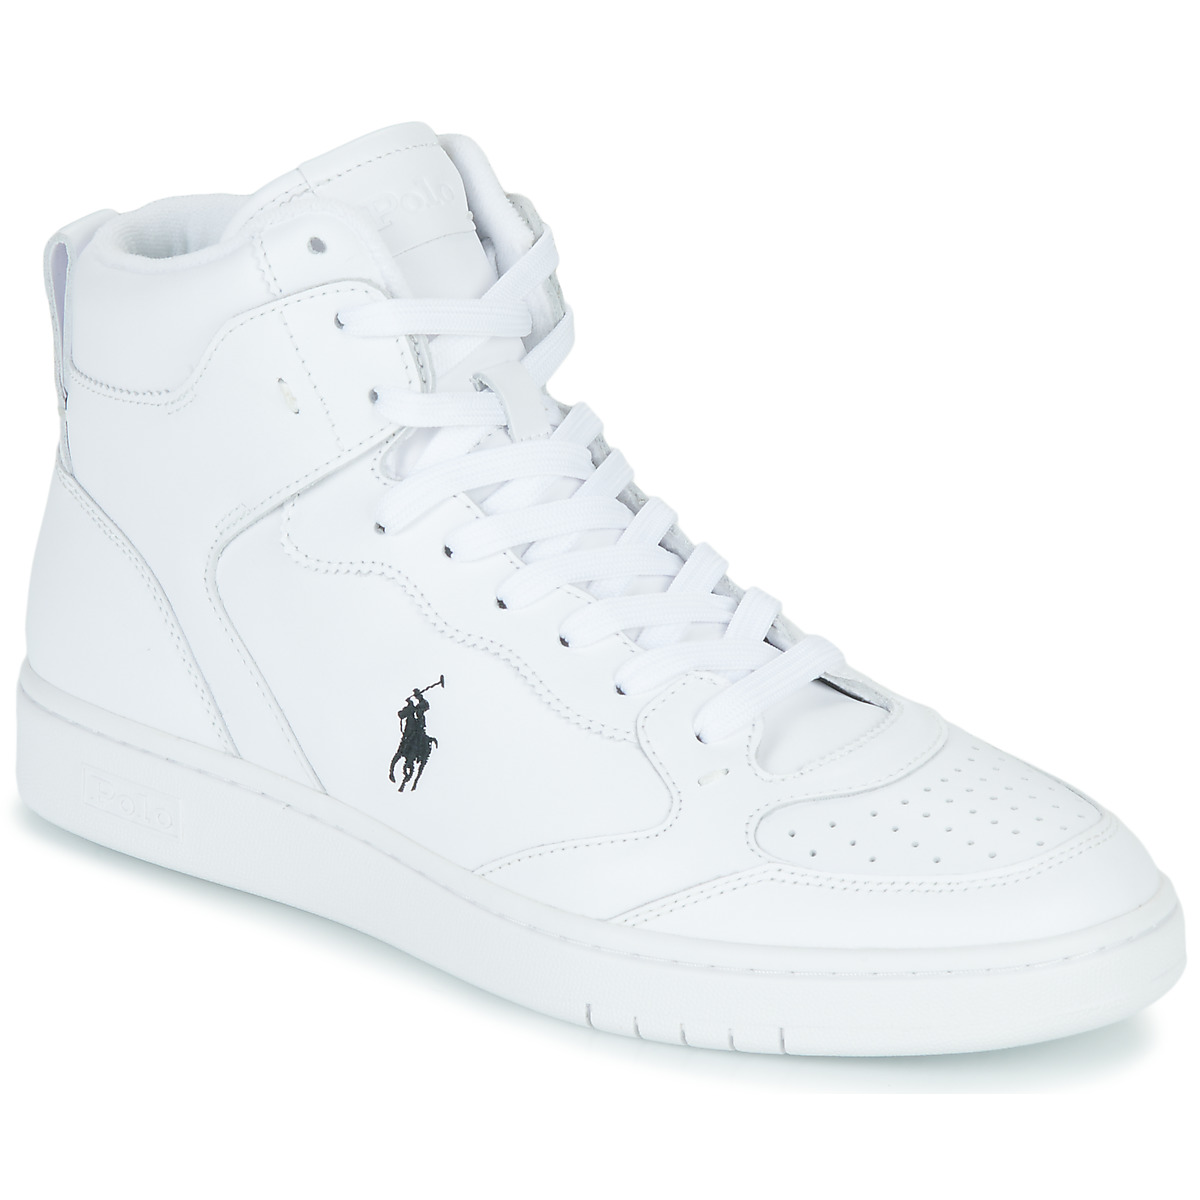 Polo Ralph Lauren Polo Crt Hgh-sneakers-low Top Lace White